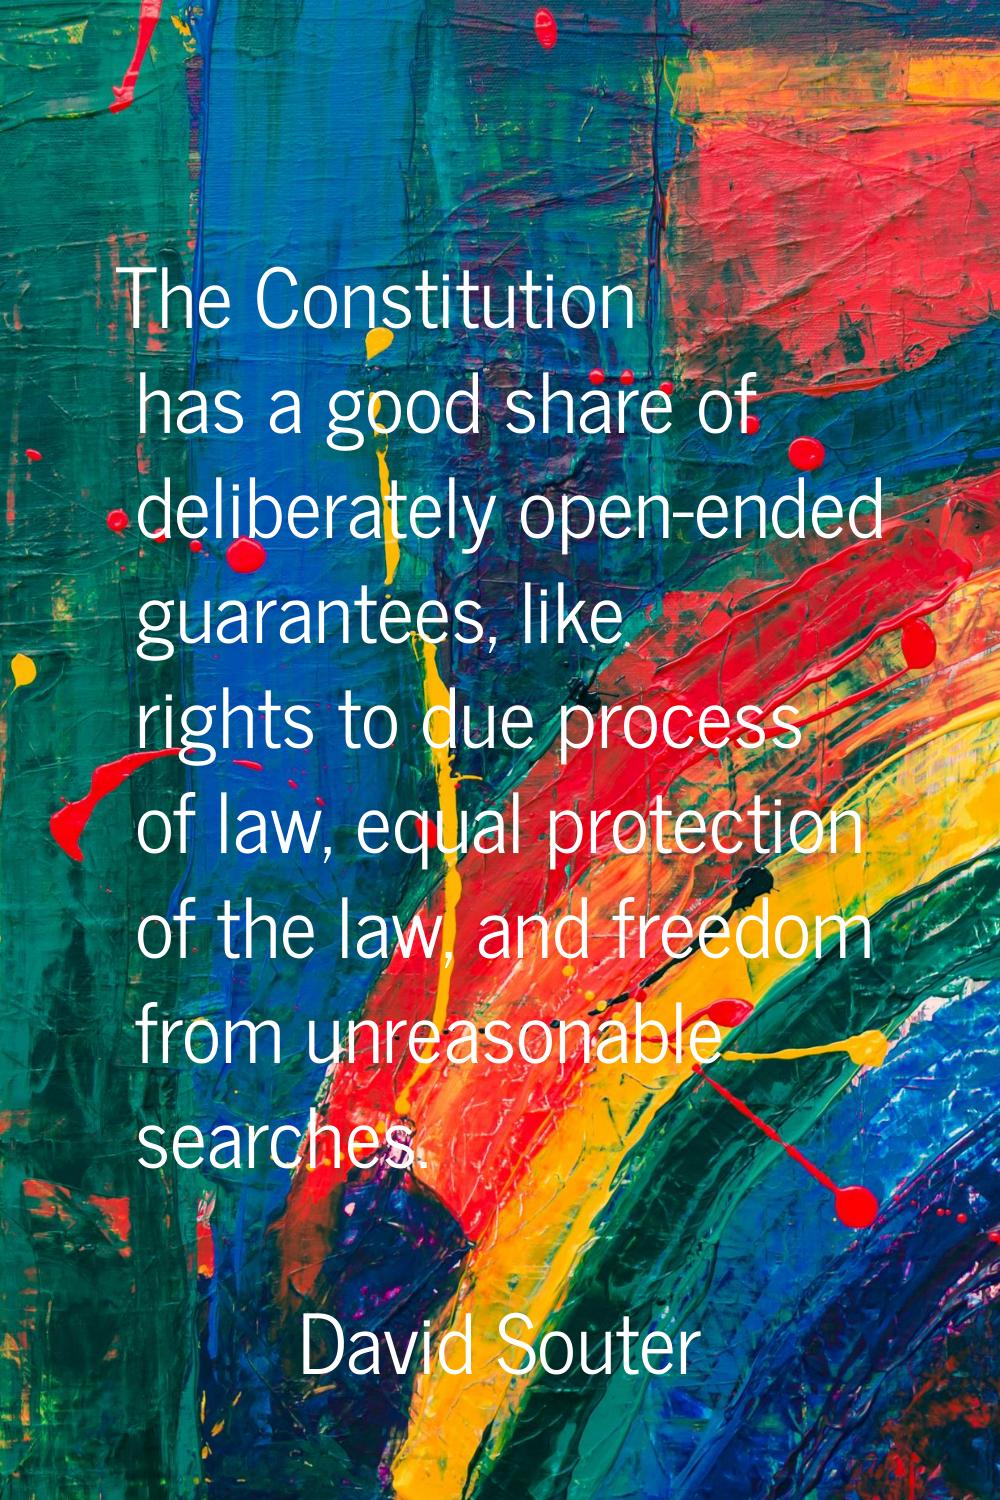 The Constitution has a good share of deliberately open-ended guarantees, like rights to due process